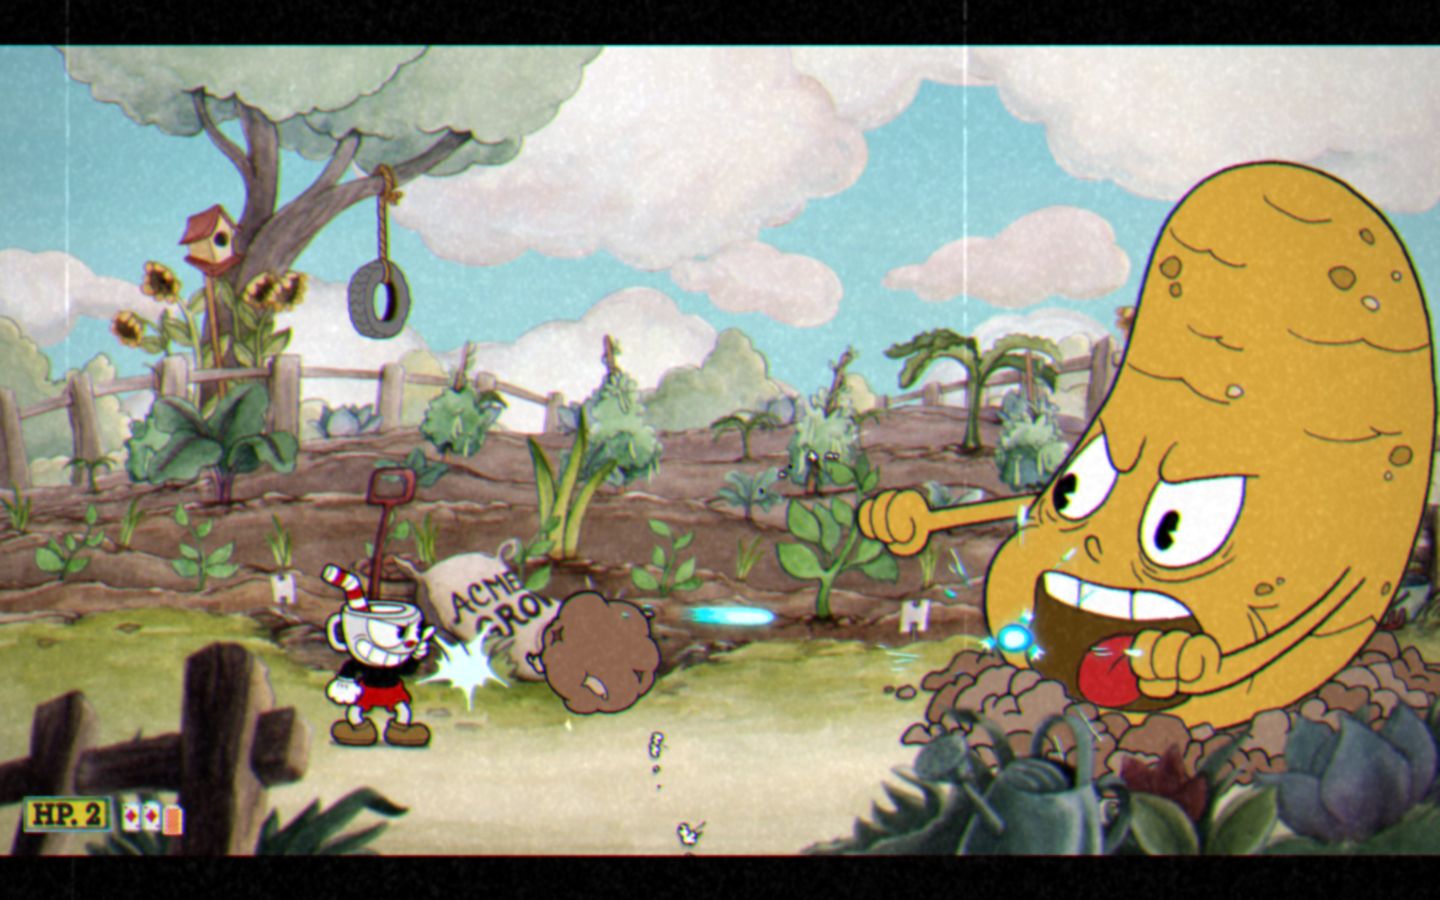 Cuphead - The player fights against a large potato enemy who is shooting balls of dirt.